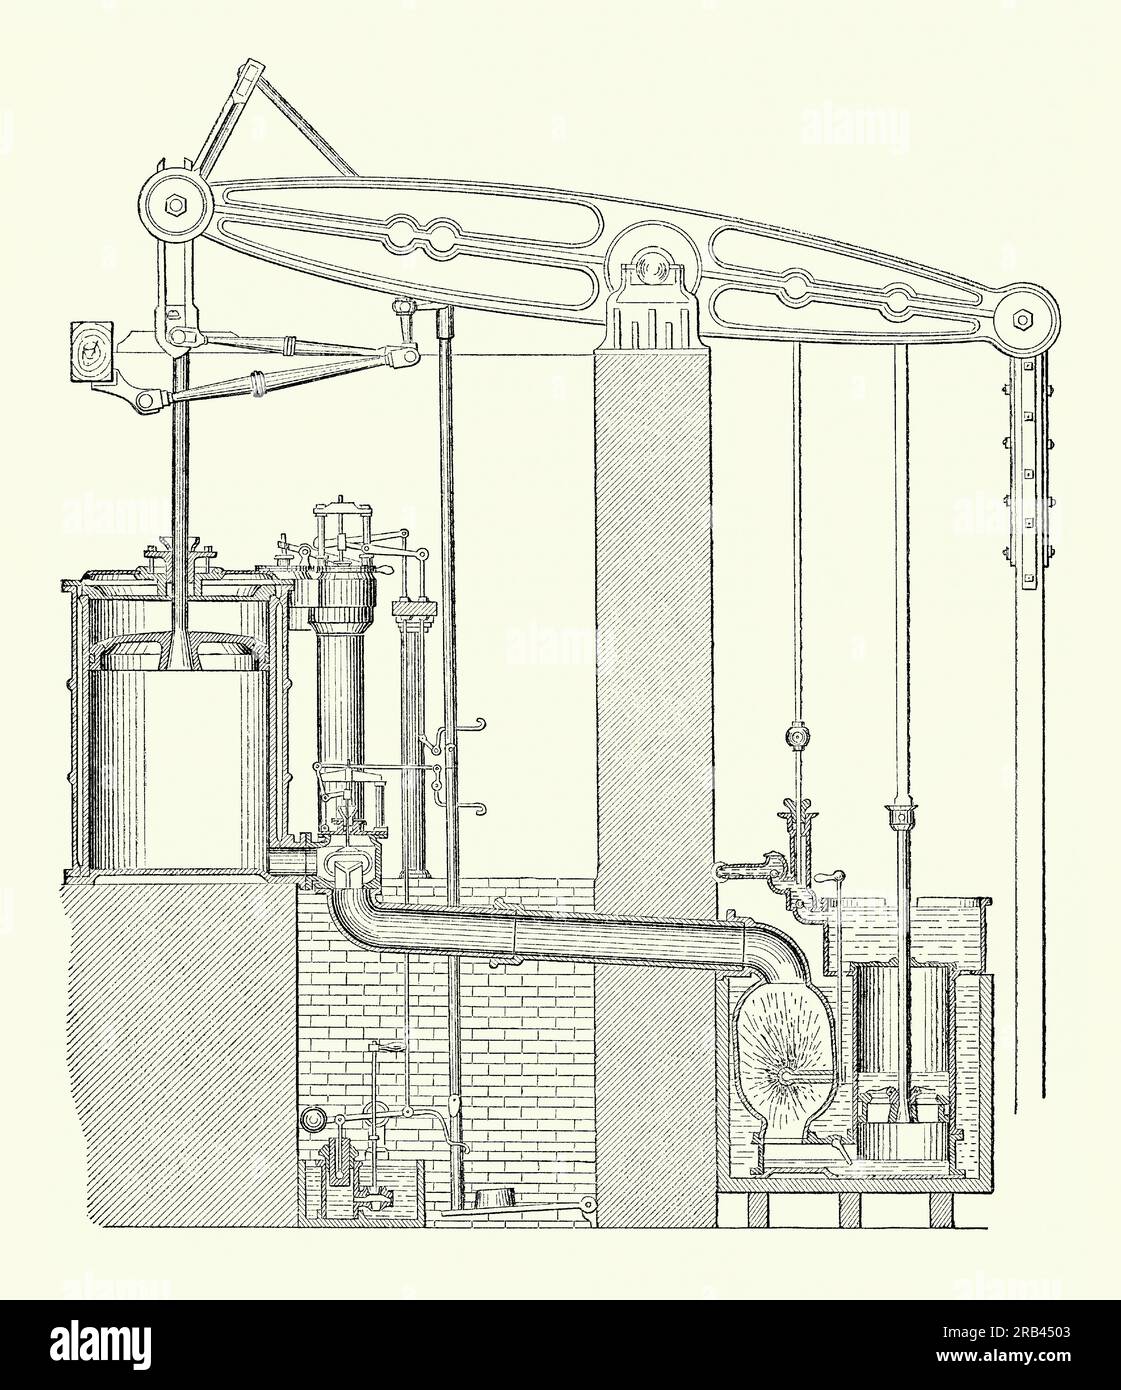 An old engraving of a large Cornish beam engine used in the 1800s. It is from a Victorian mechanical engineering book of the 1880s. The engine was mainly used to pump excess water out of mines. A Cornish engine is a type of steam engine developed in Cornwall, England, UK. It is a beam engine that uses steam at a higher pressure than the earlier atmospheric beam engines designed by Thomas Newcomen and then James Watt. The engines were also used for winching materials into and out of the mine and for powering on-site ore stamping machinery to extract metals like copper and tin from the ore. Stock Photo